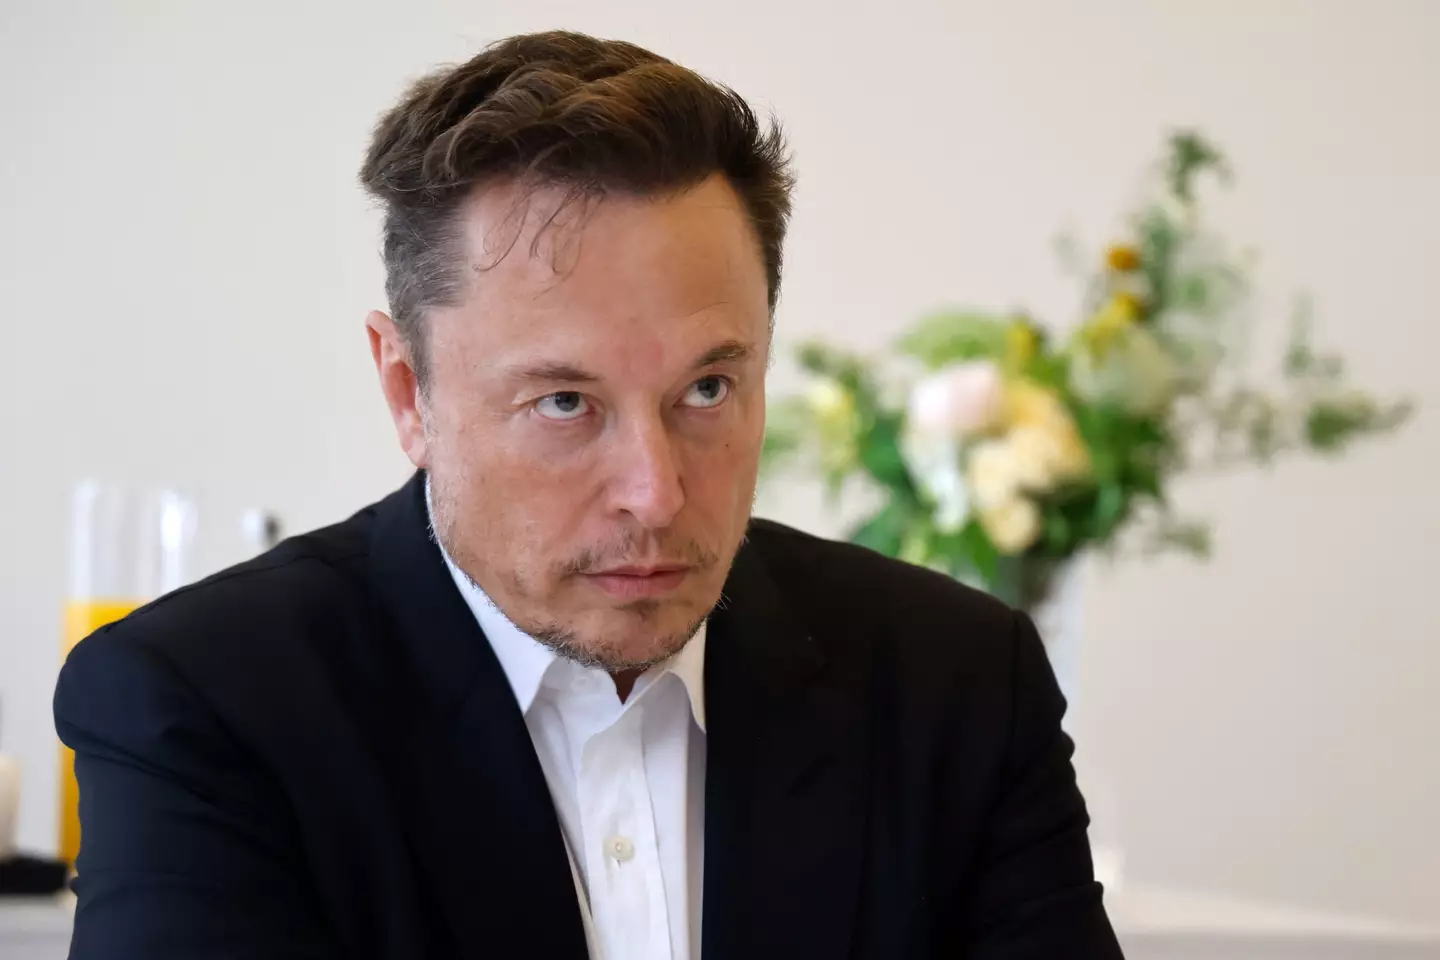 The upcoming biography claims that Musk is agitated about something he calls the 'woke mind virus'.